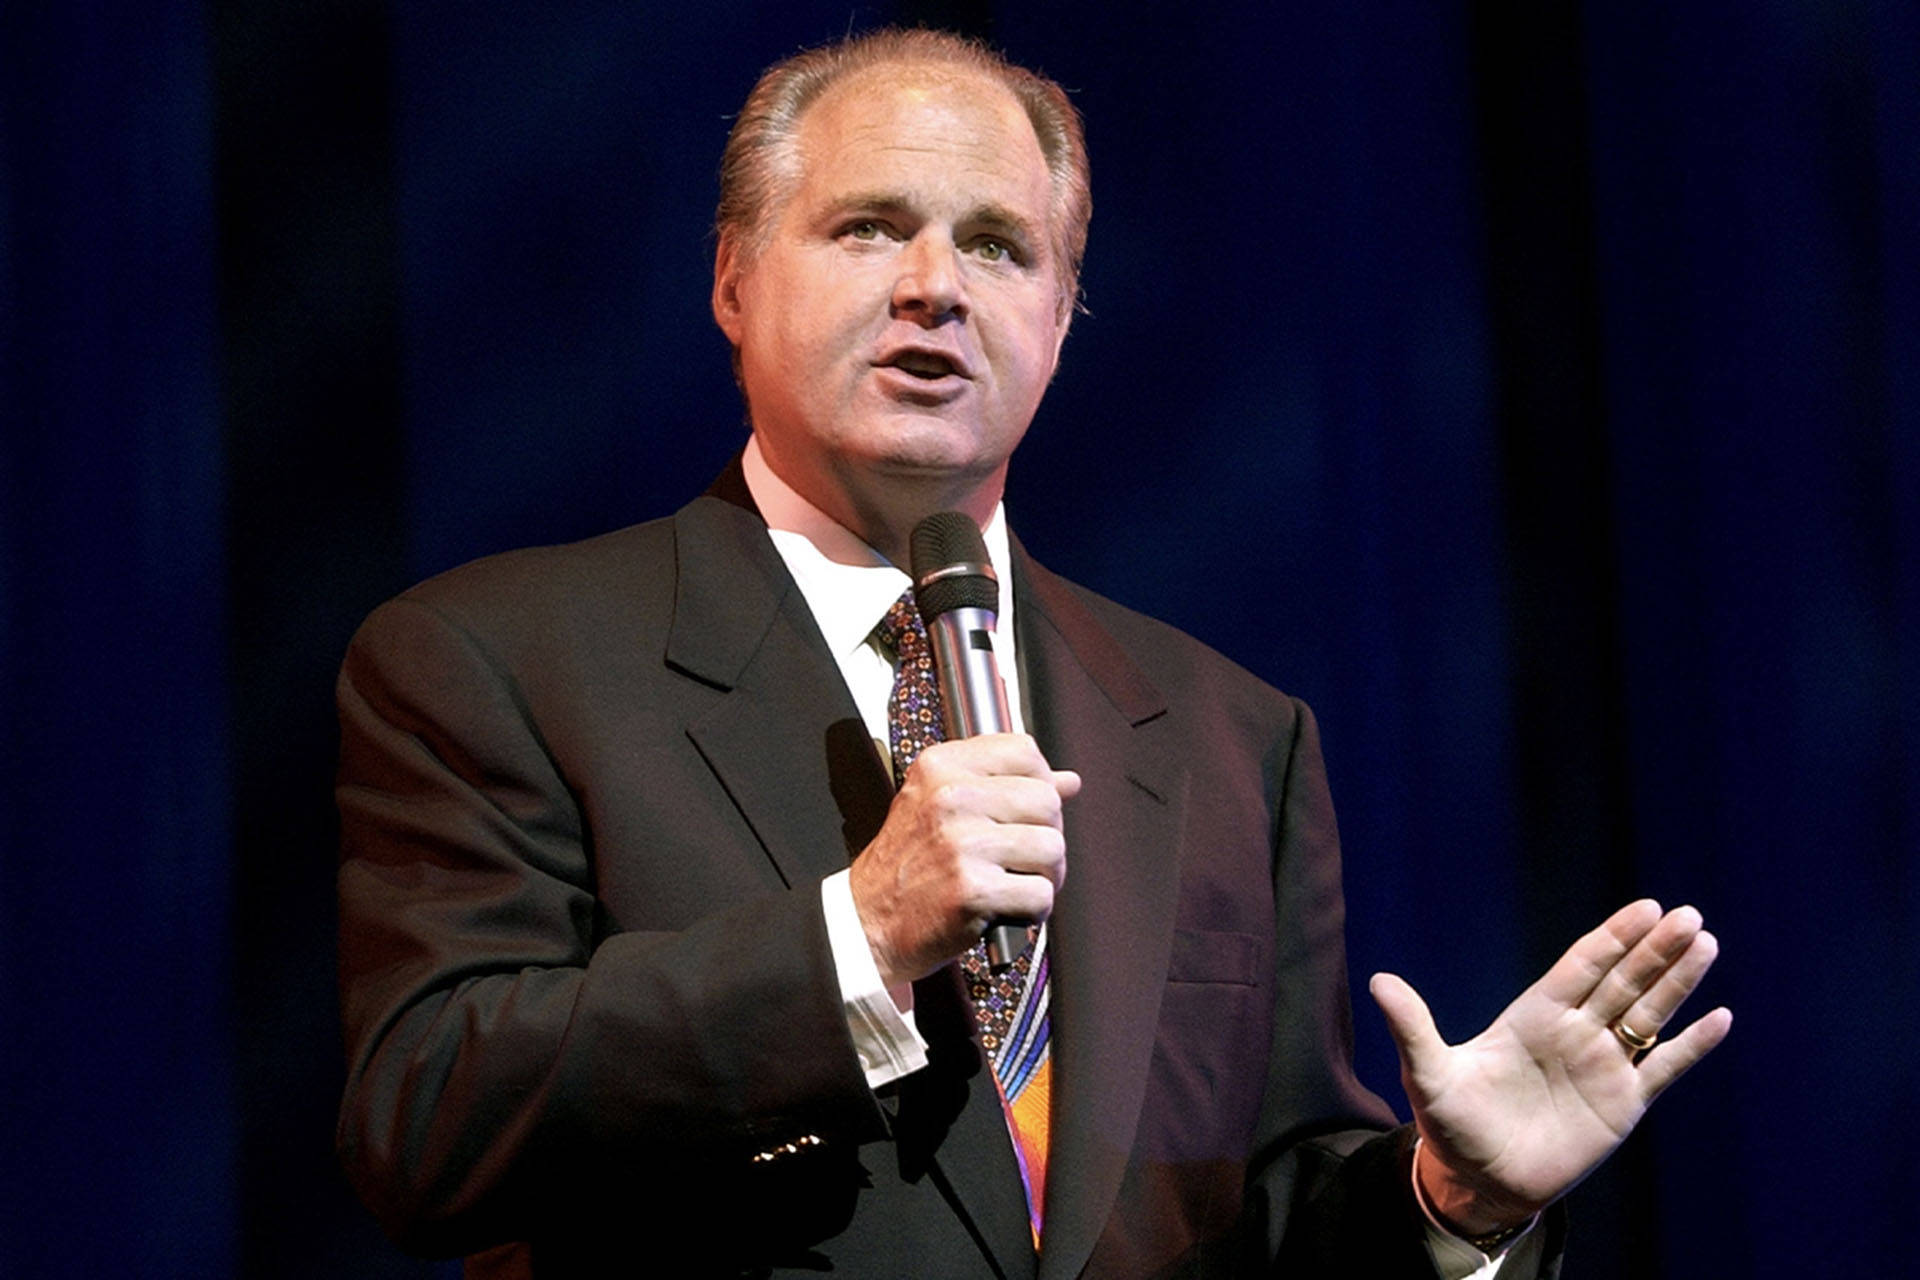 Rush Limbaugh At Ford Theatre Wallpaper